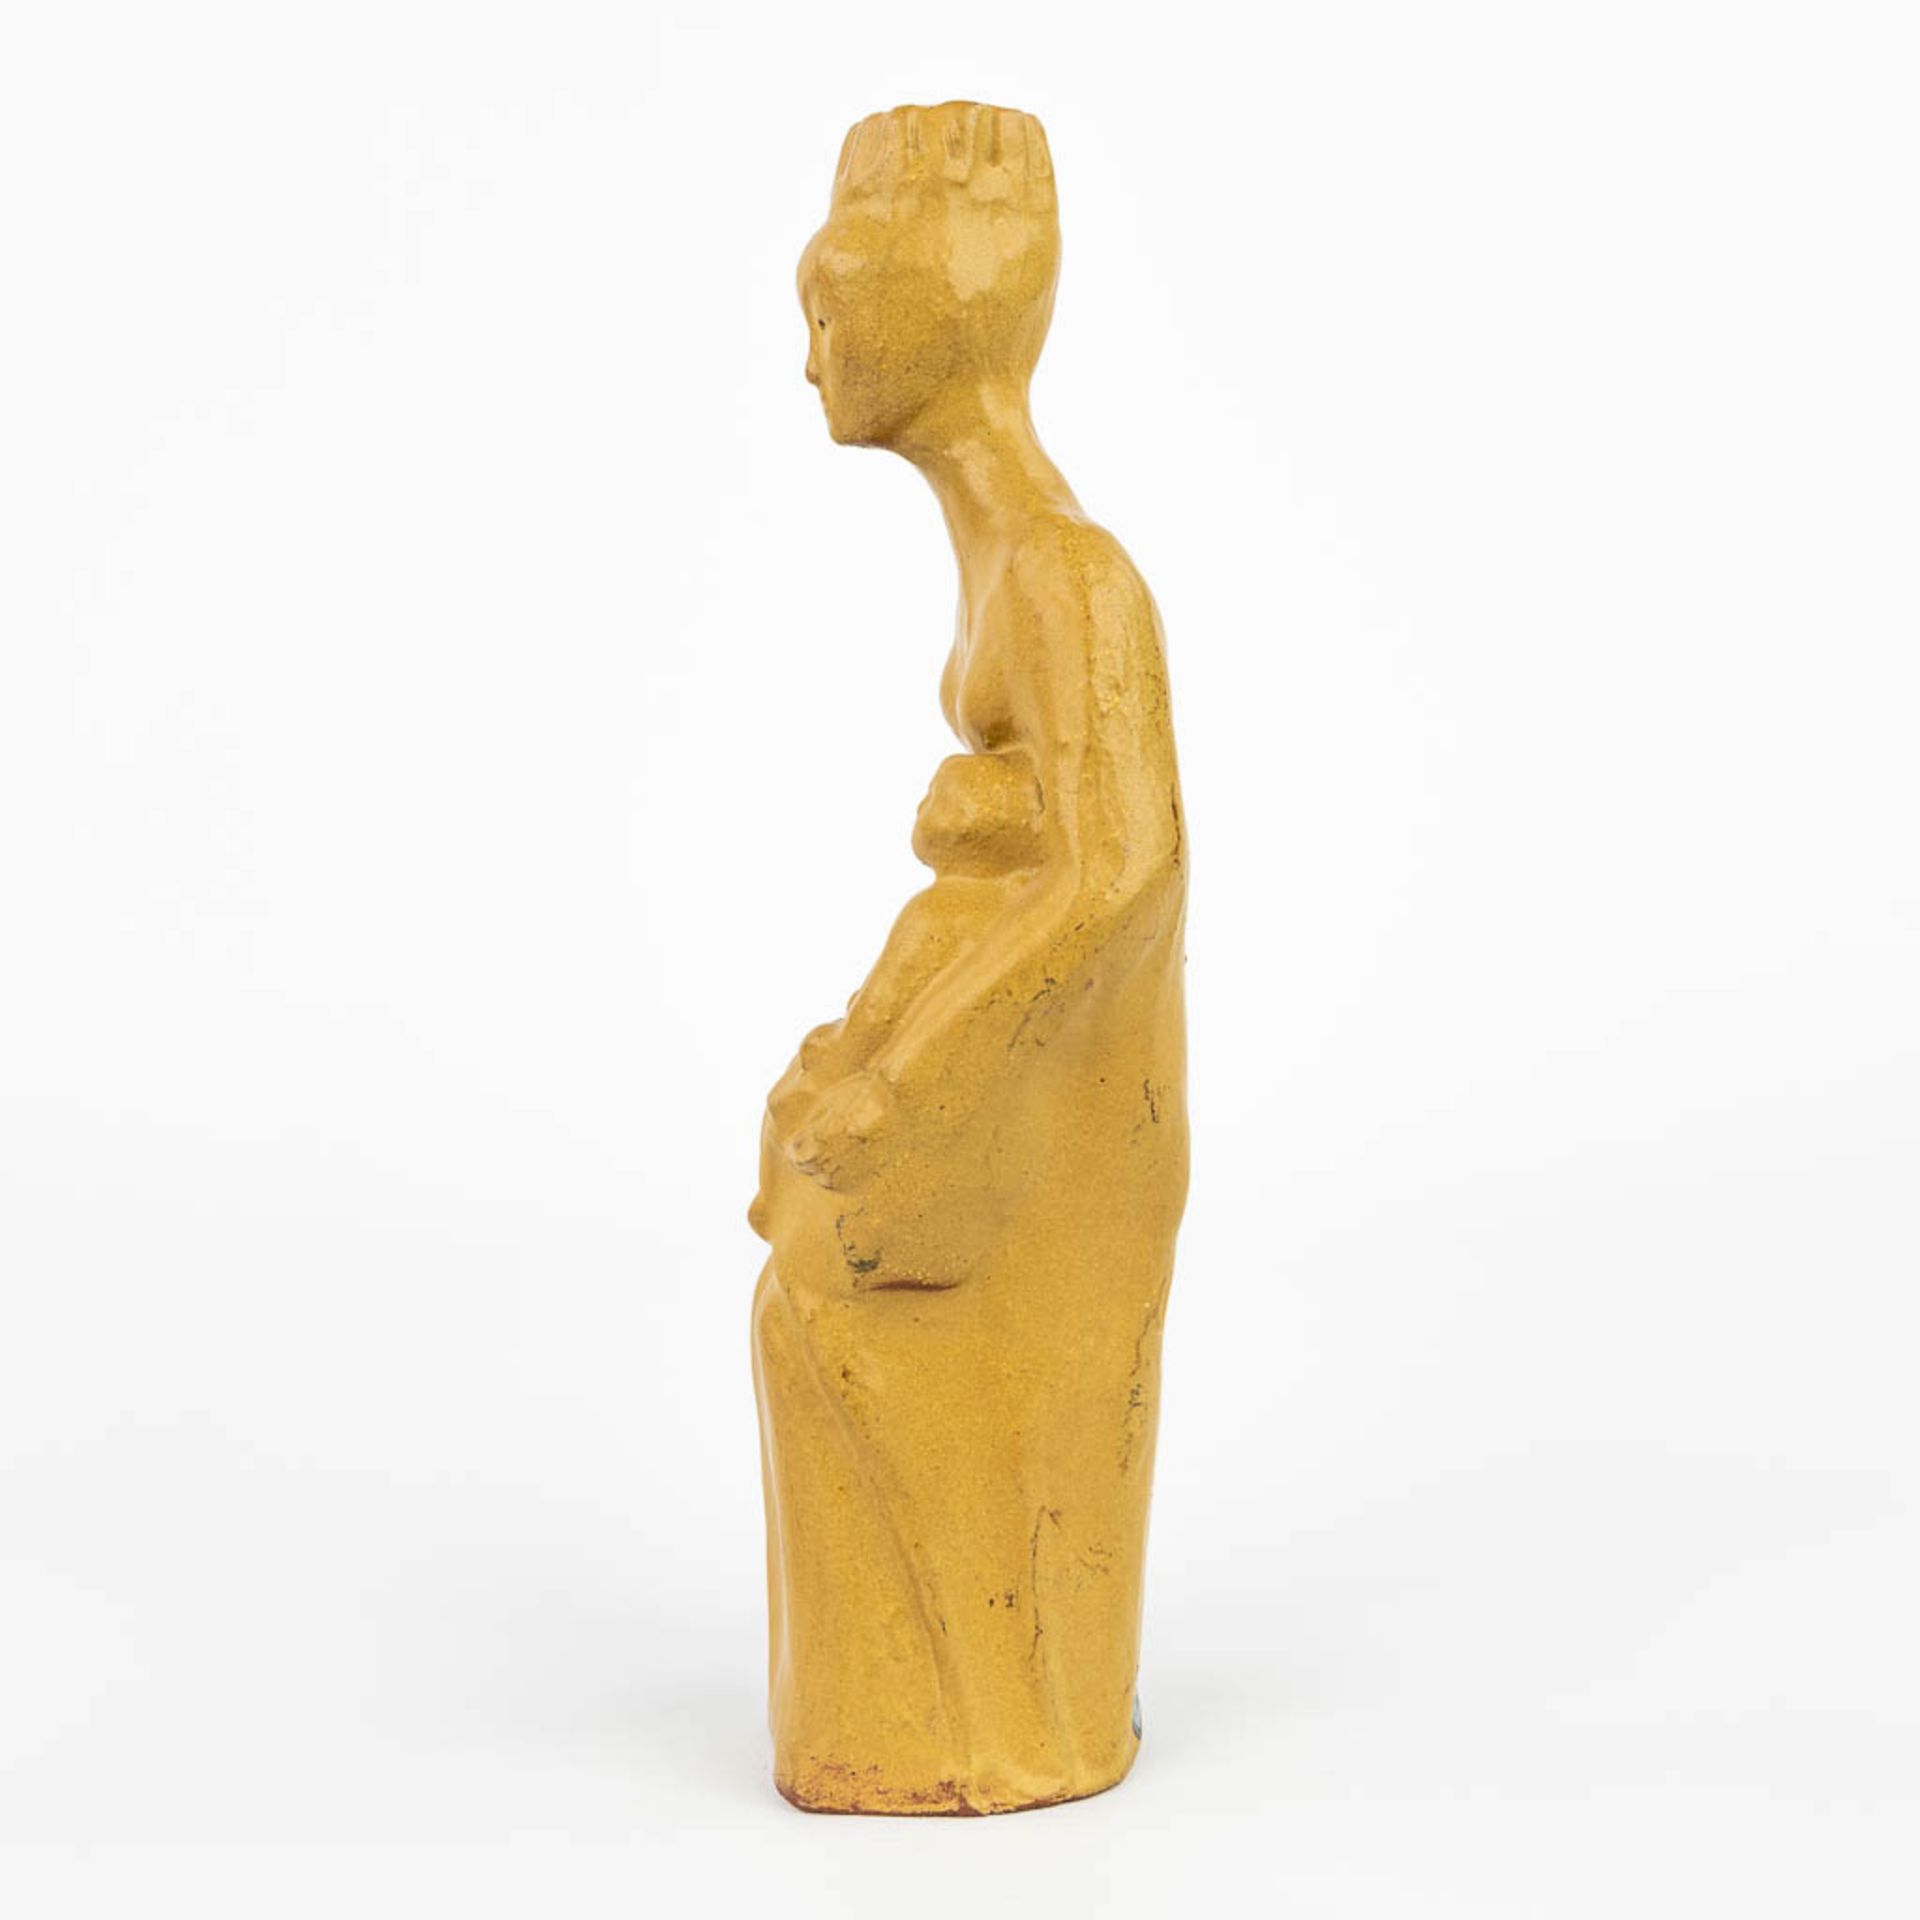 A statue of Madonna with a child made by Perignem. (H:25cm) - Image 3 of 10